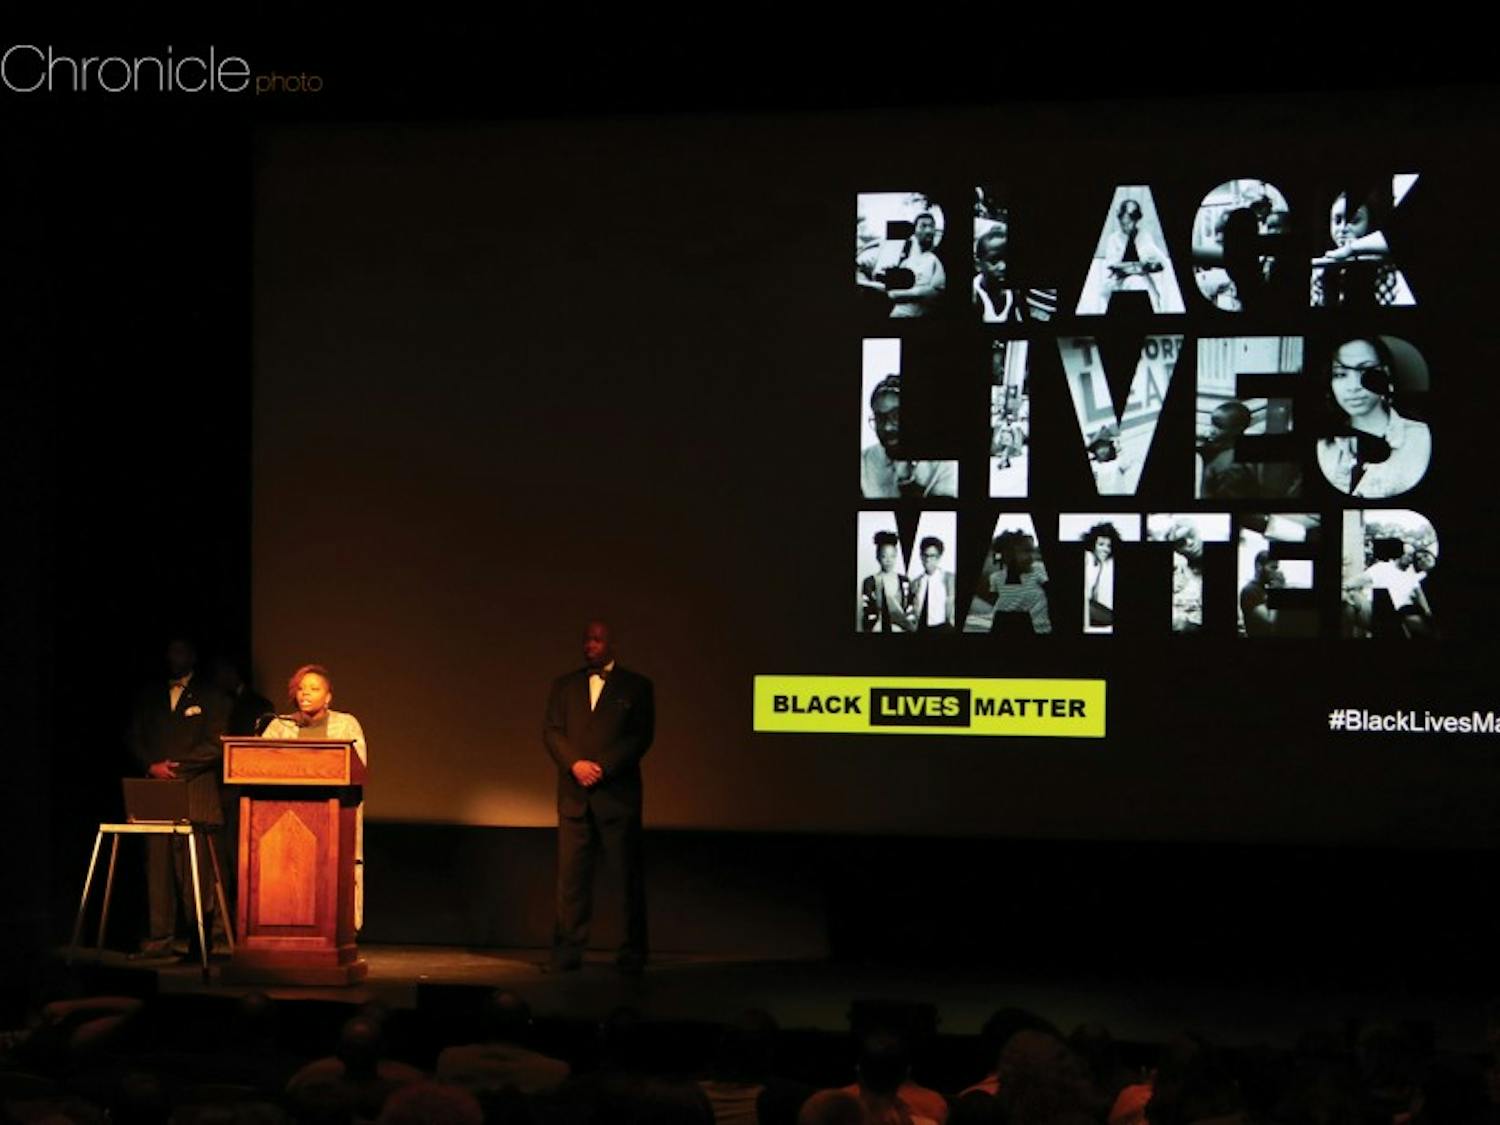 Patrisse Cullors, co-founder of the Black Lives Matter movement, addressed a packed Page Auditorium Wednesday evening.